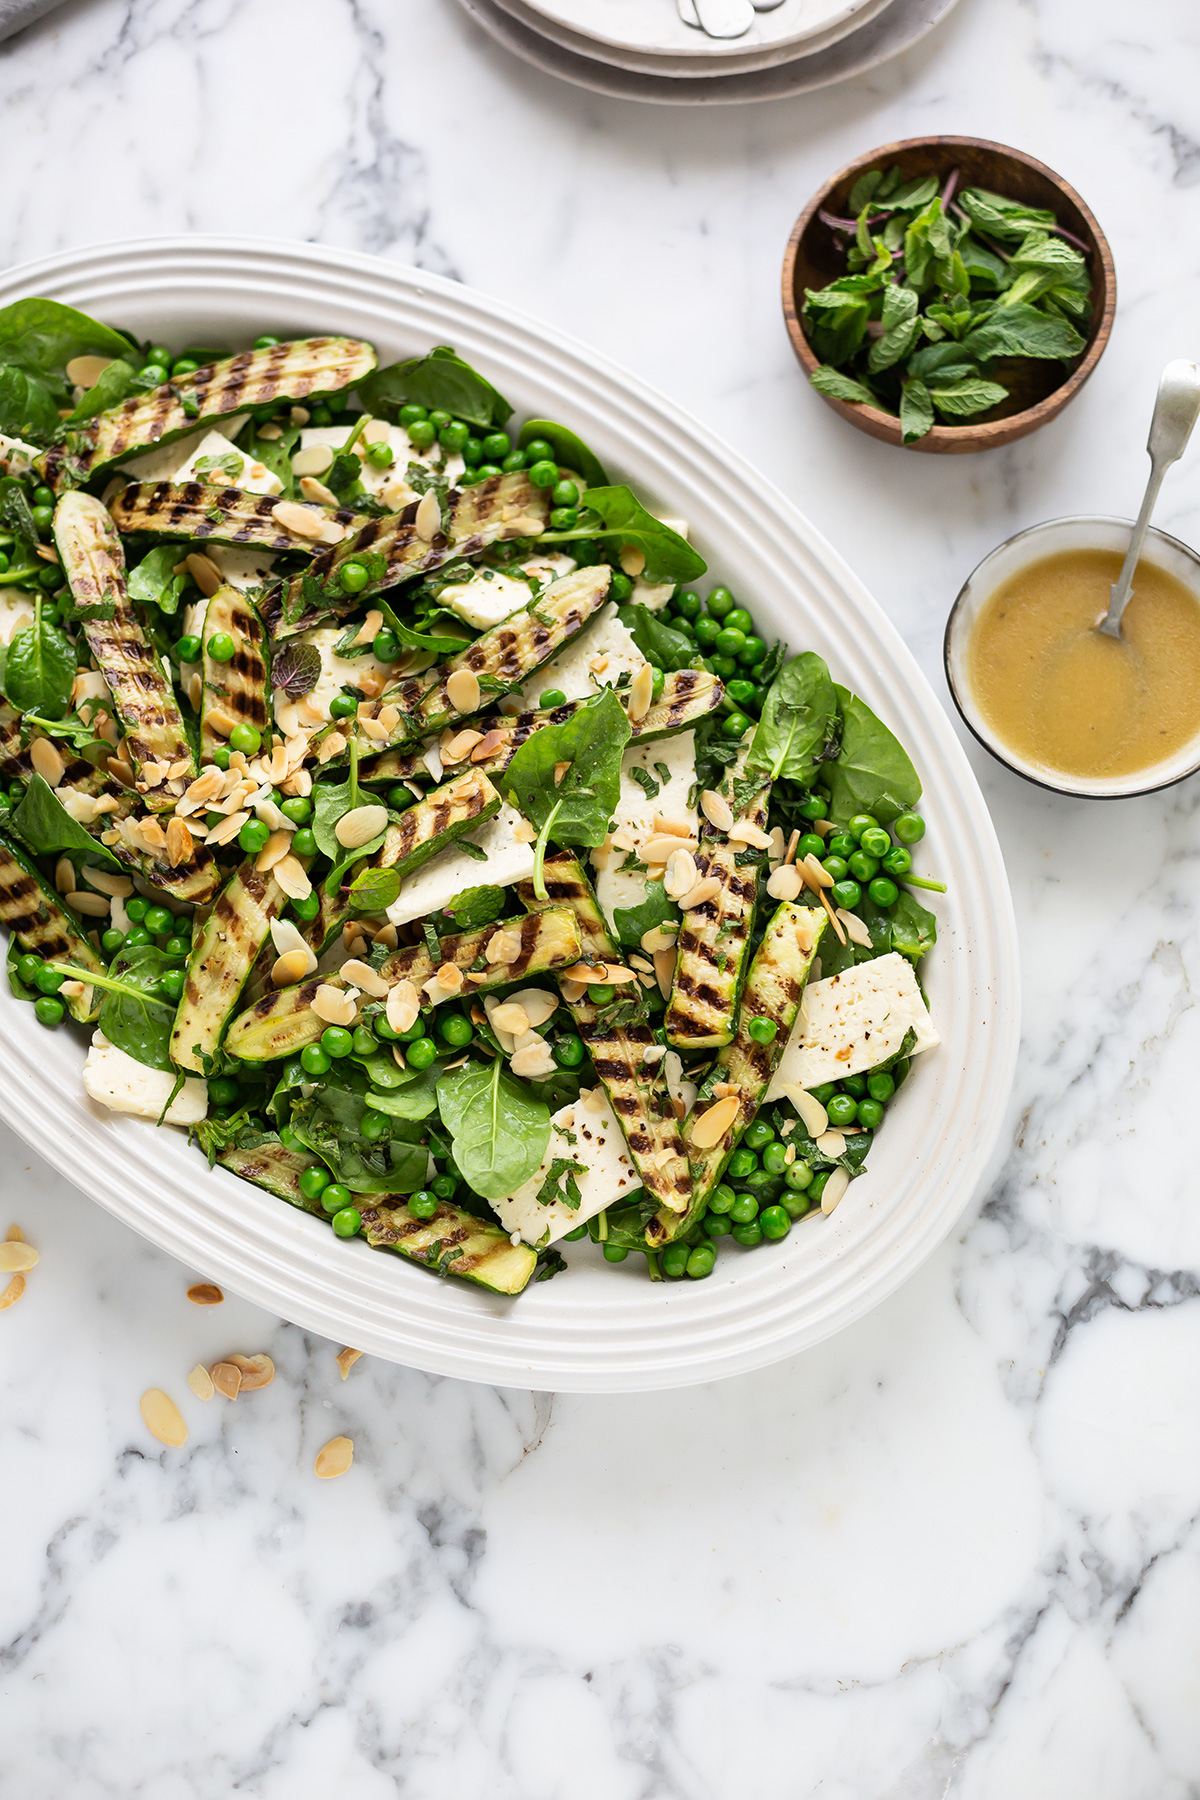 Spinach salad with grilled zucchini, peas, feta & mint recipe